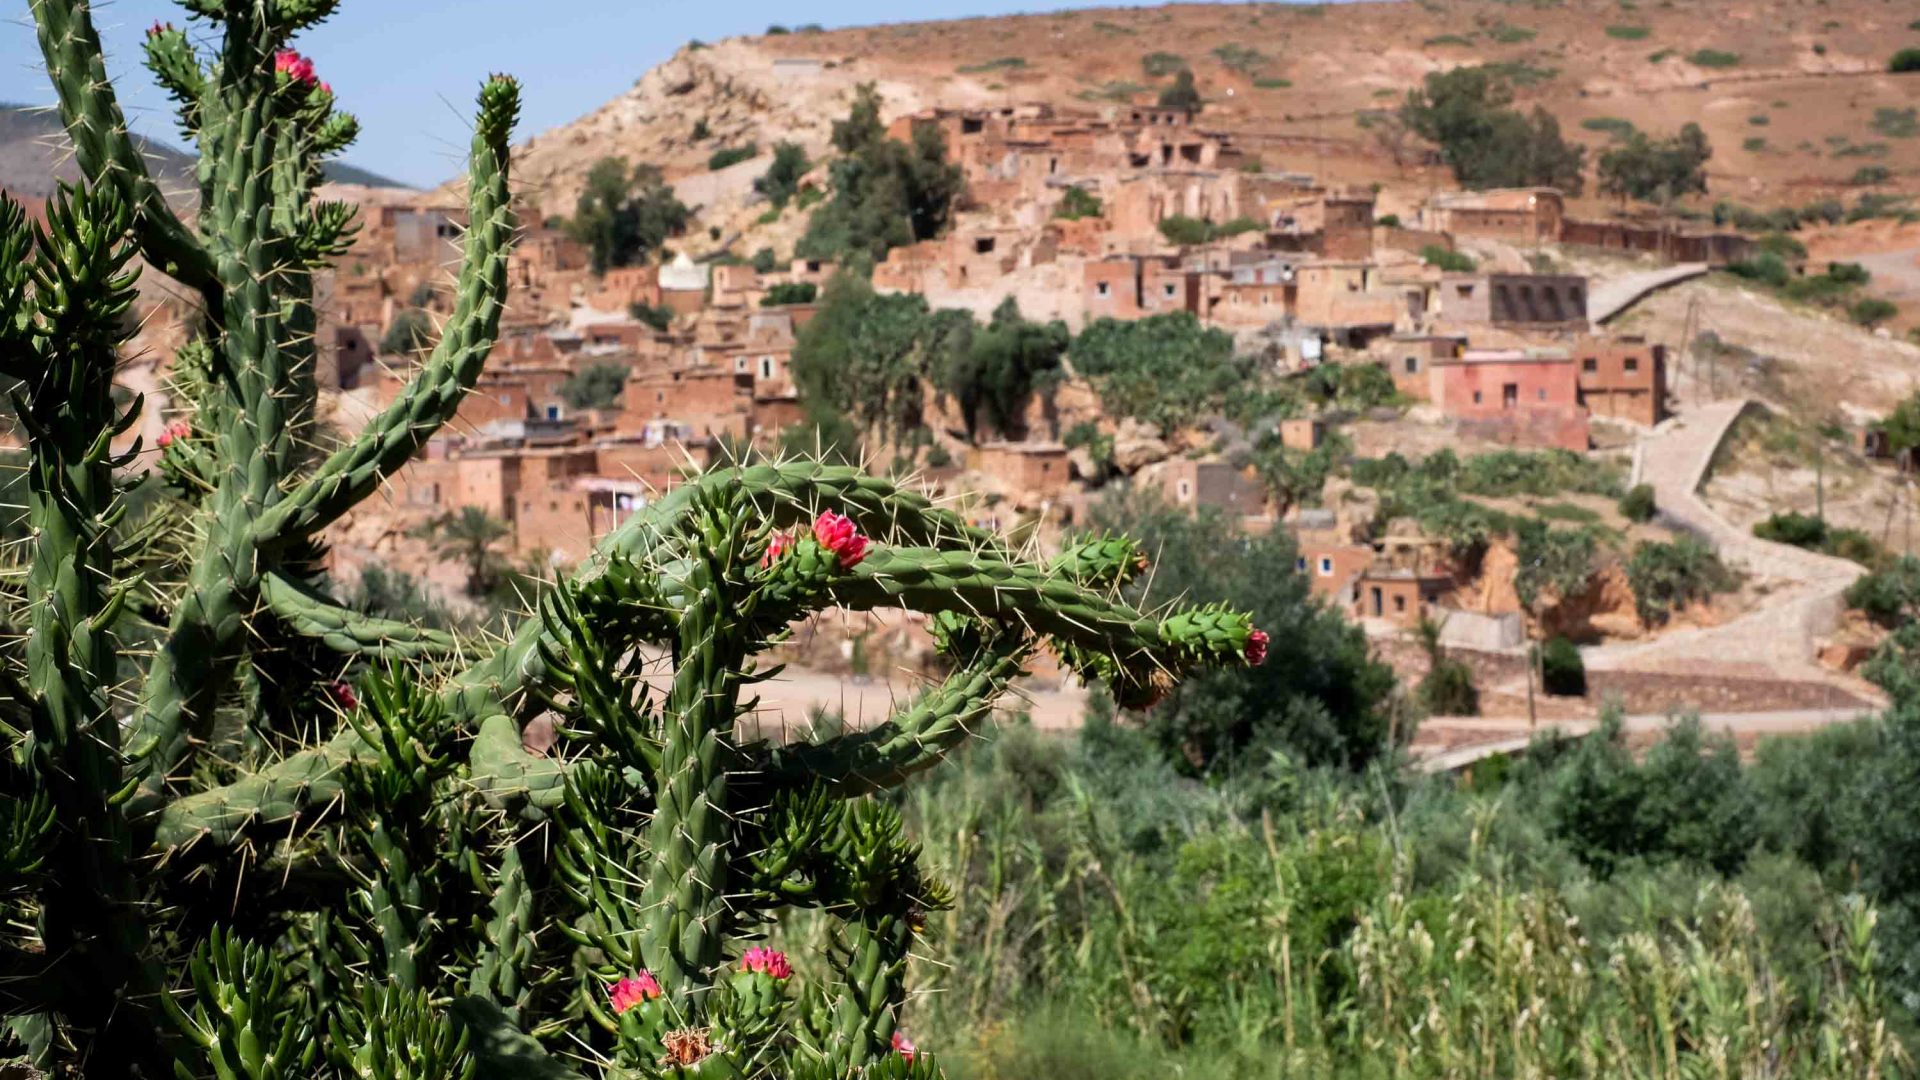 A village in the Atlas mountains.